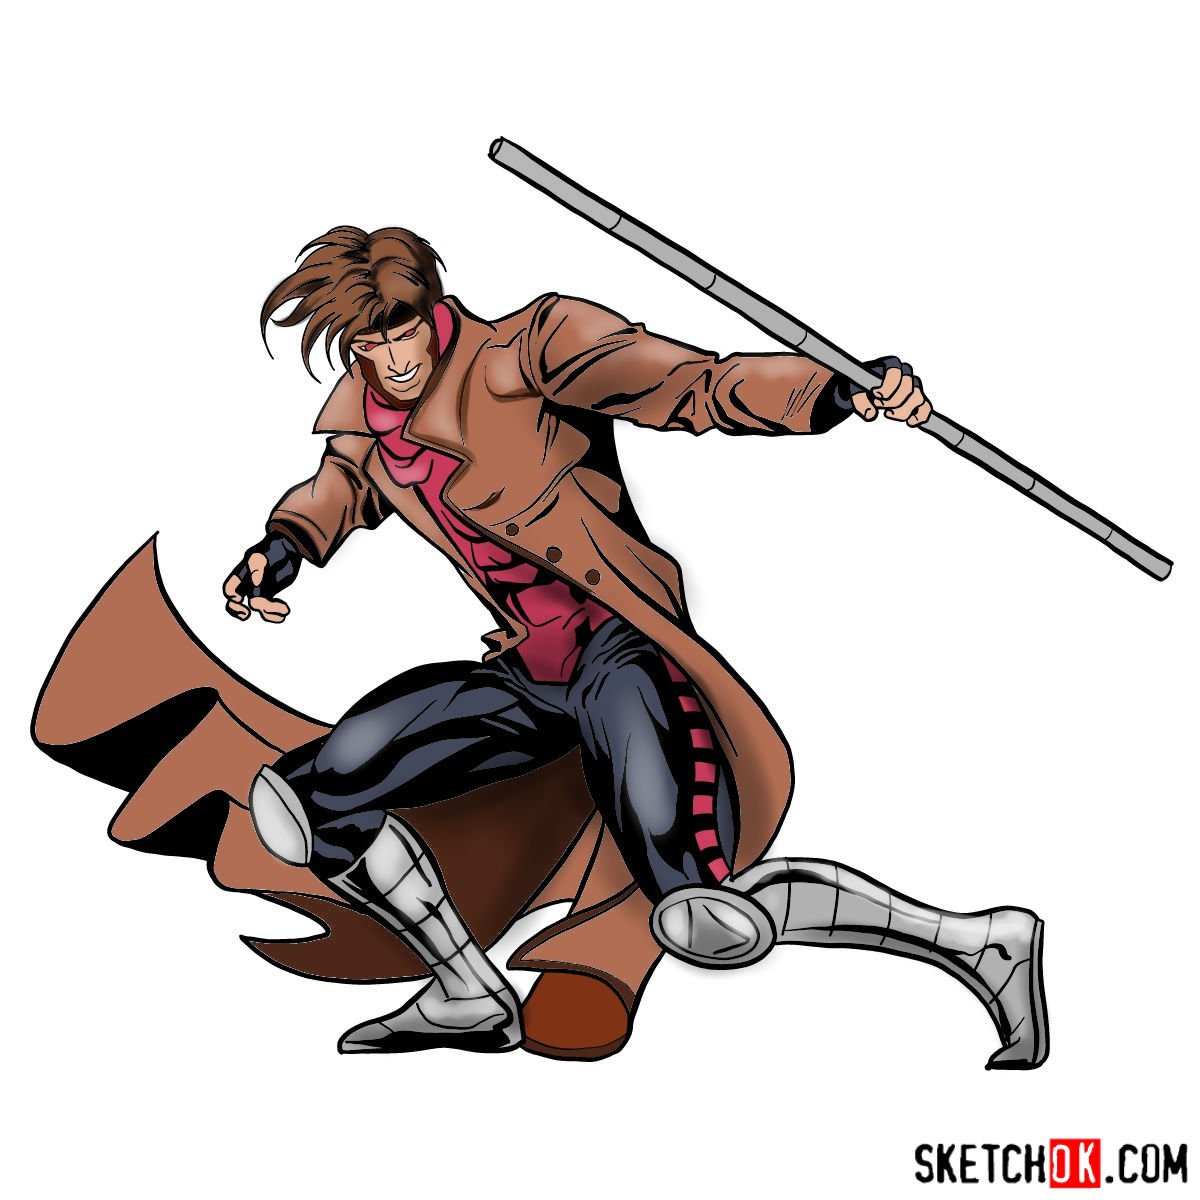 How to draw Gambit from X-Men